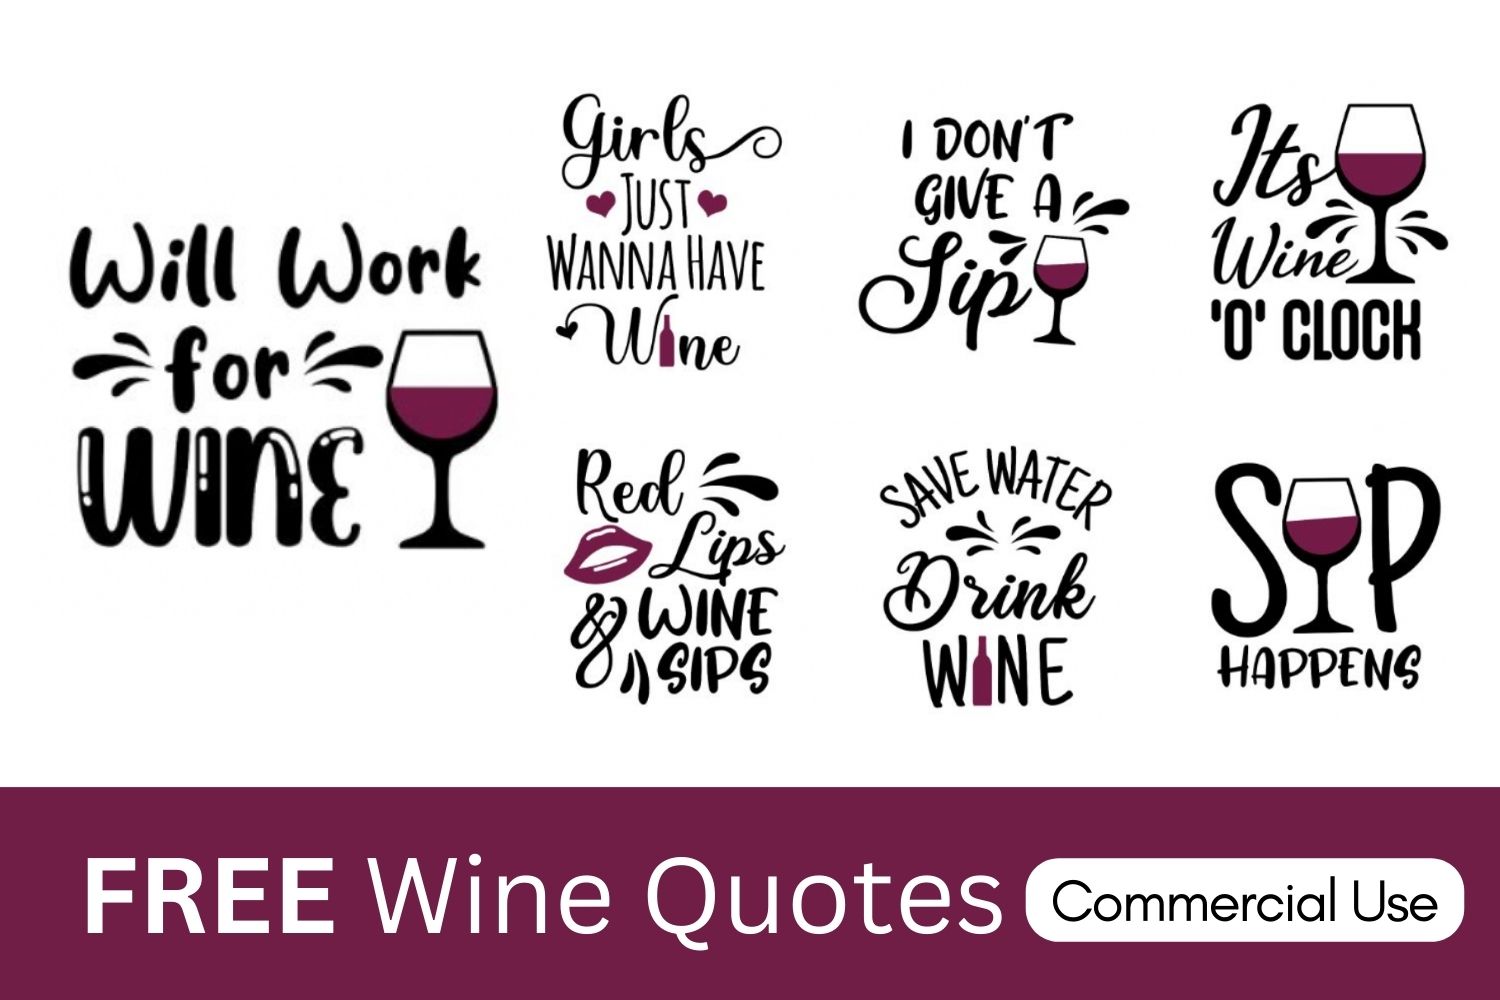 Wine Quotes & SVG cricut silhouette laser cut scroll saw layered vector free download